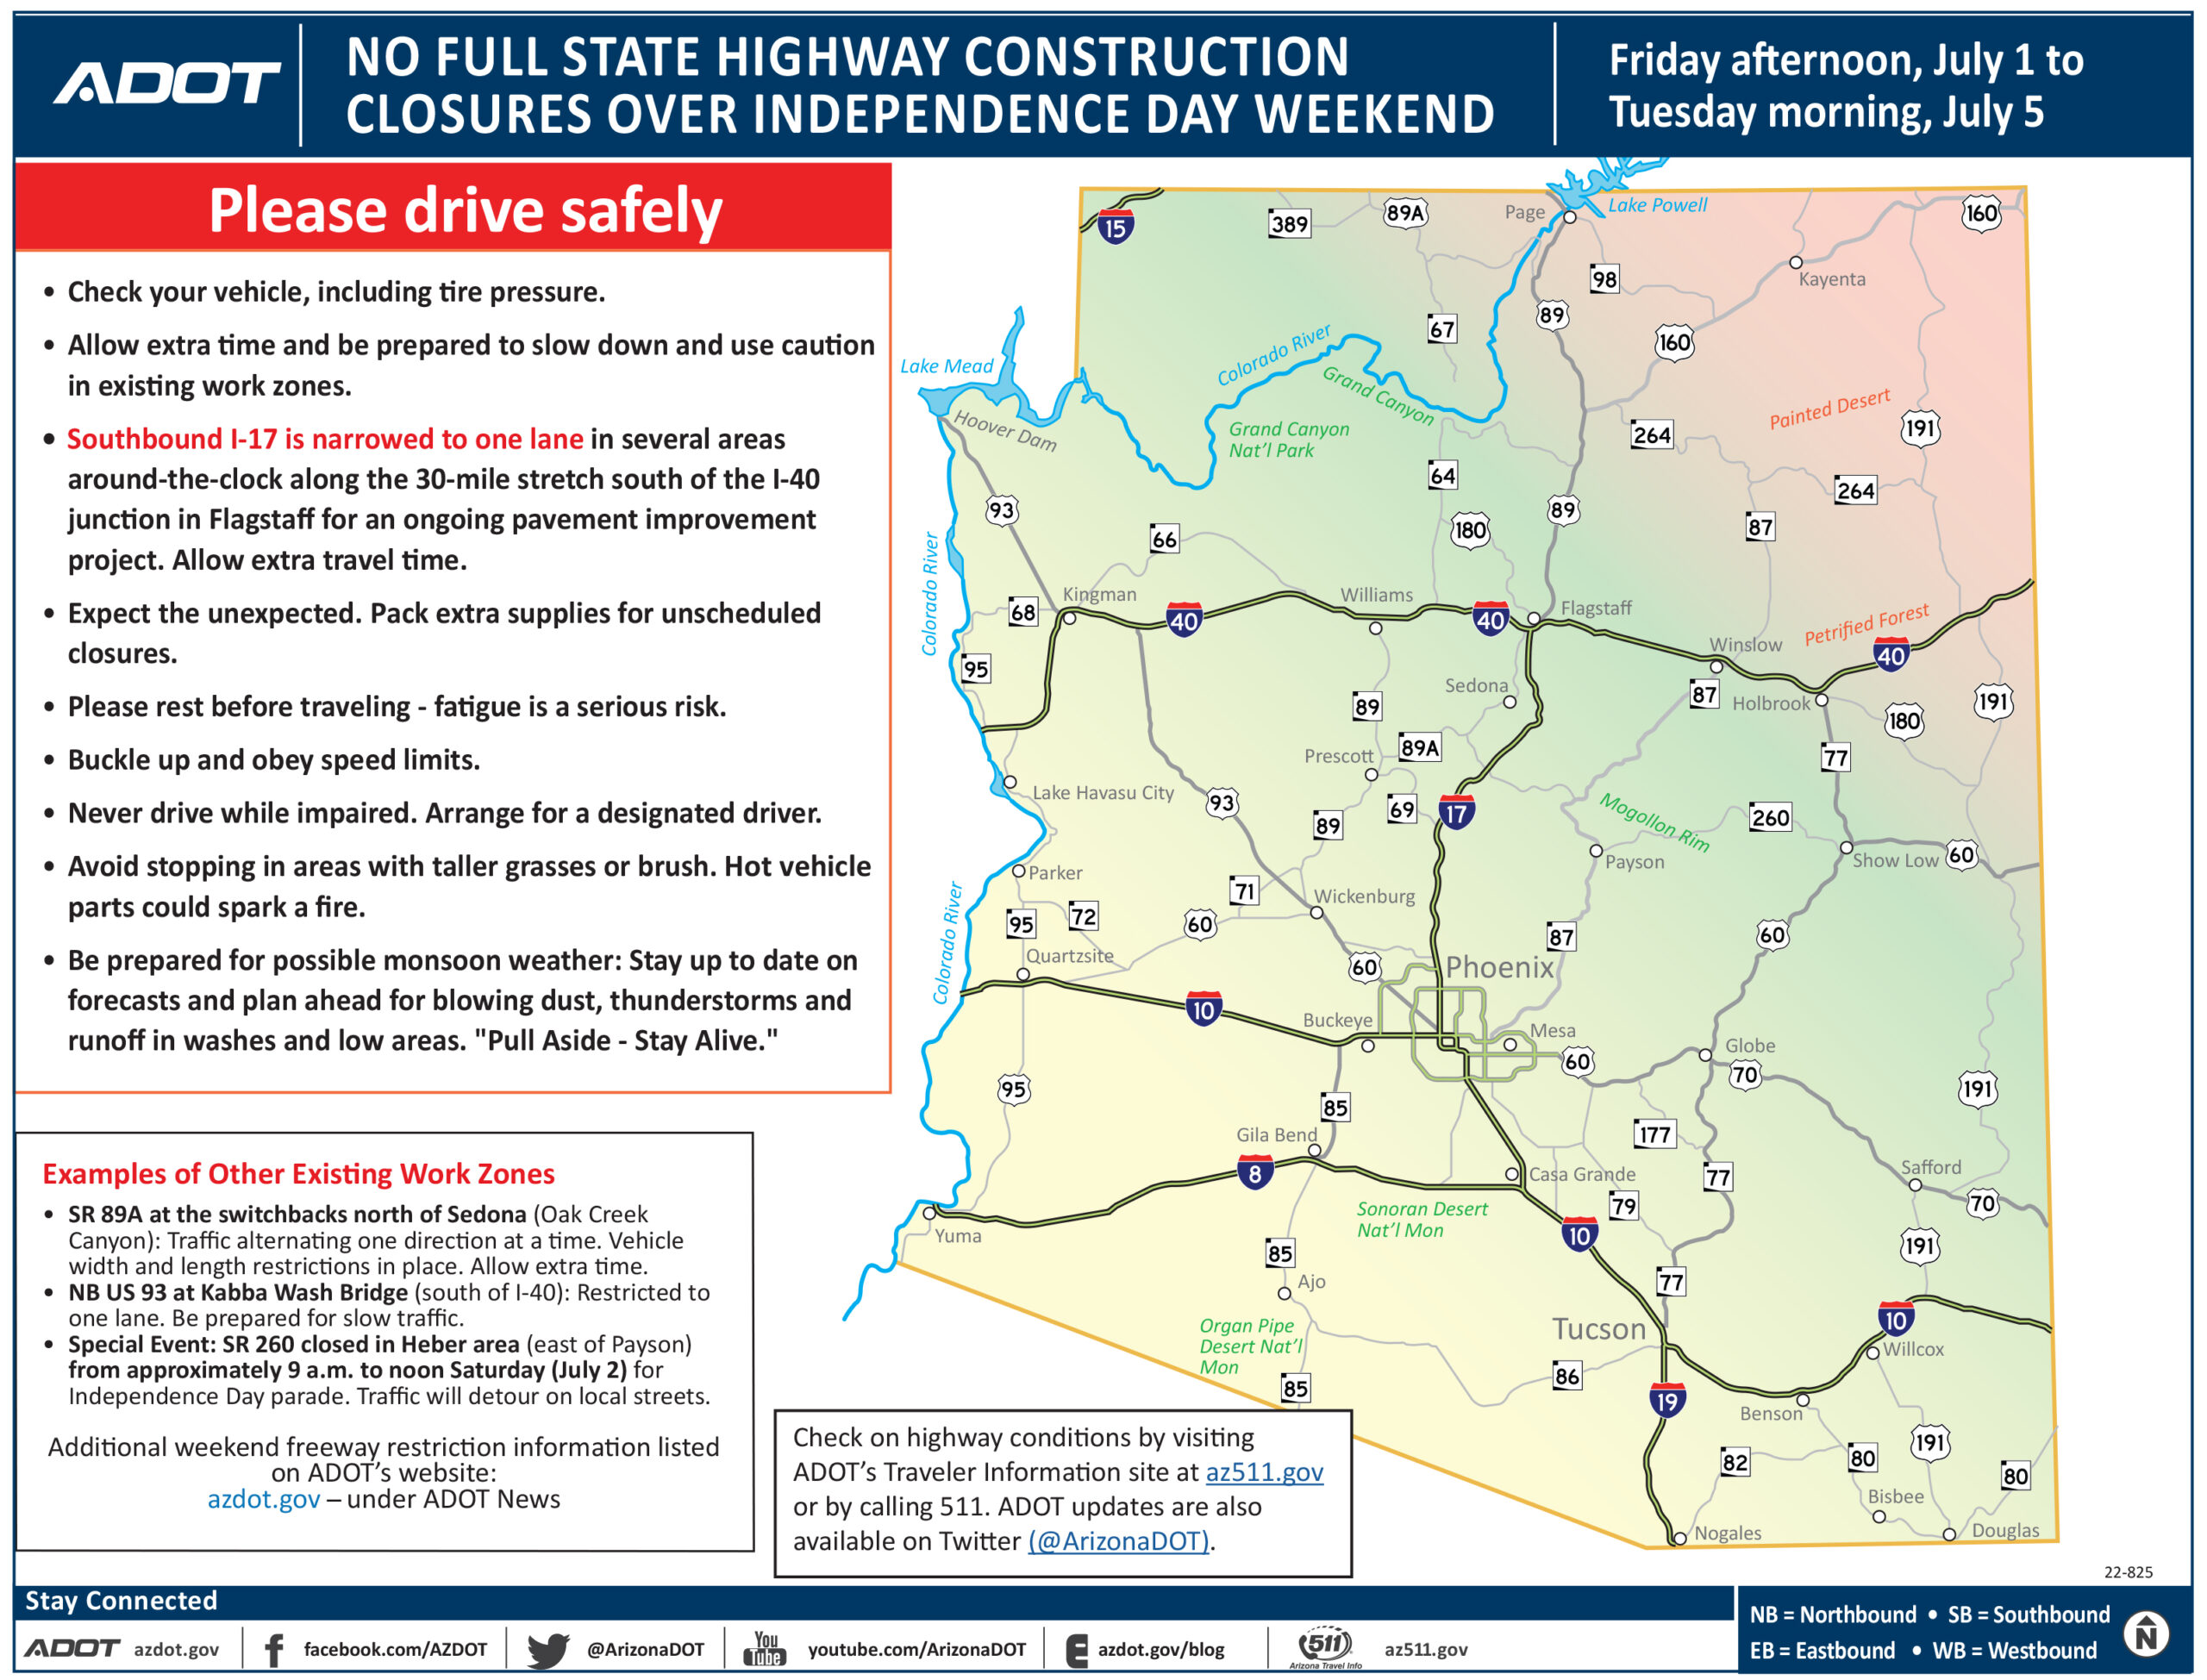 No full closures planned on Arizona highways over Independence Day weekend, July 1-5